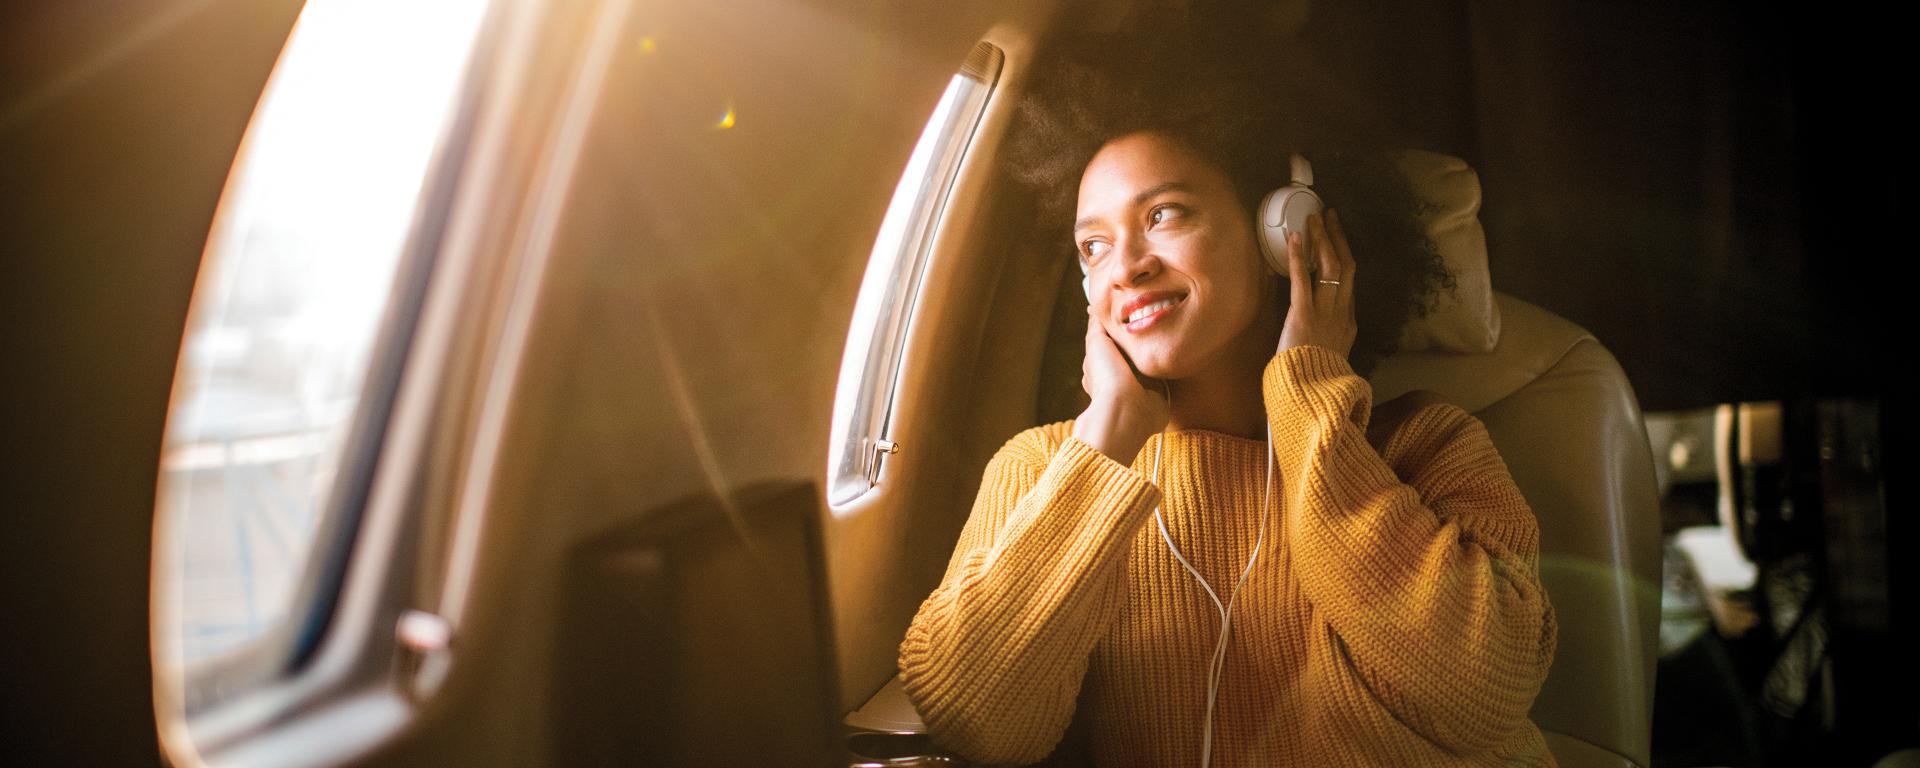 Woman flying airplane with headphones